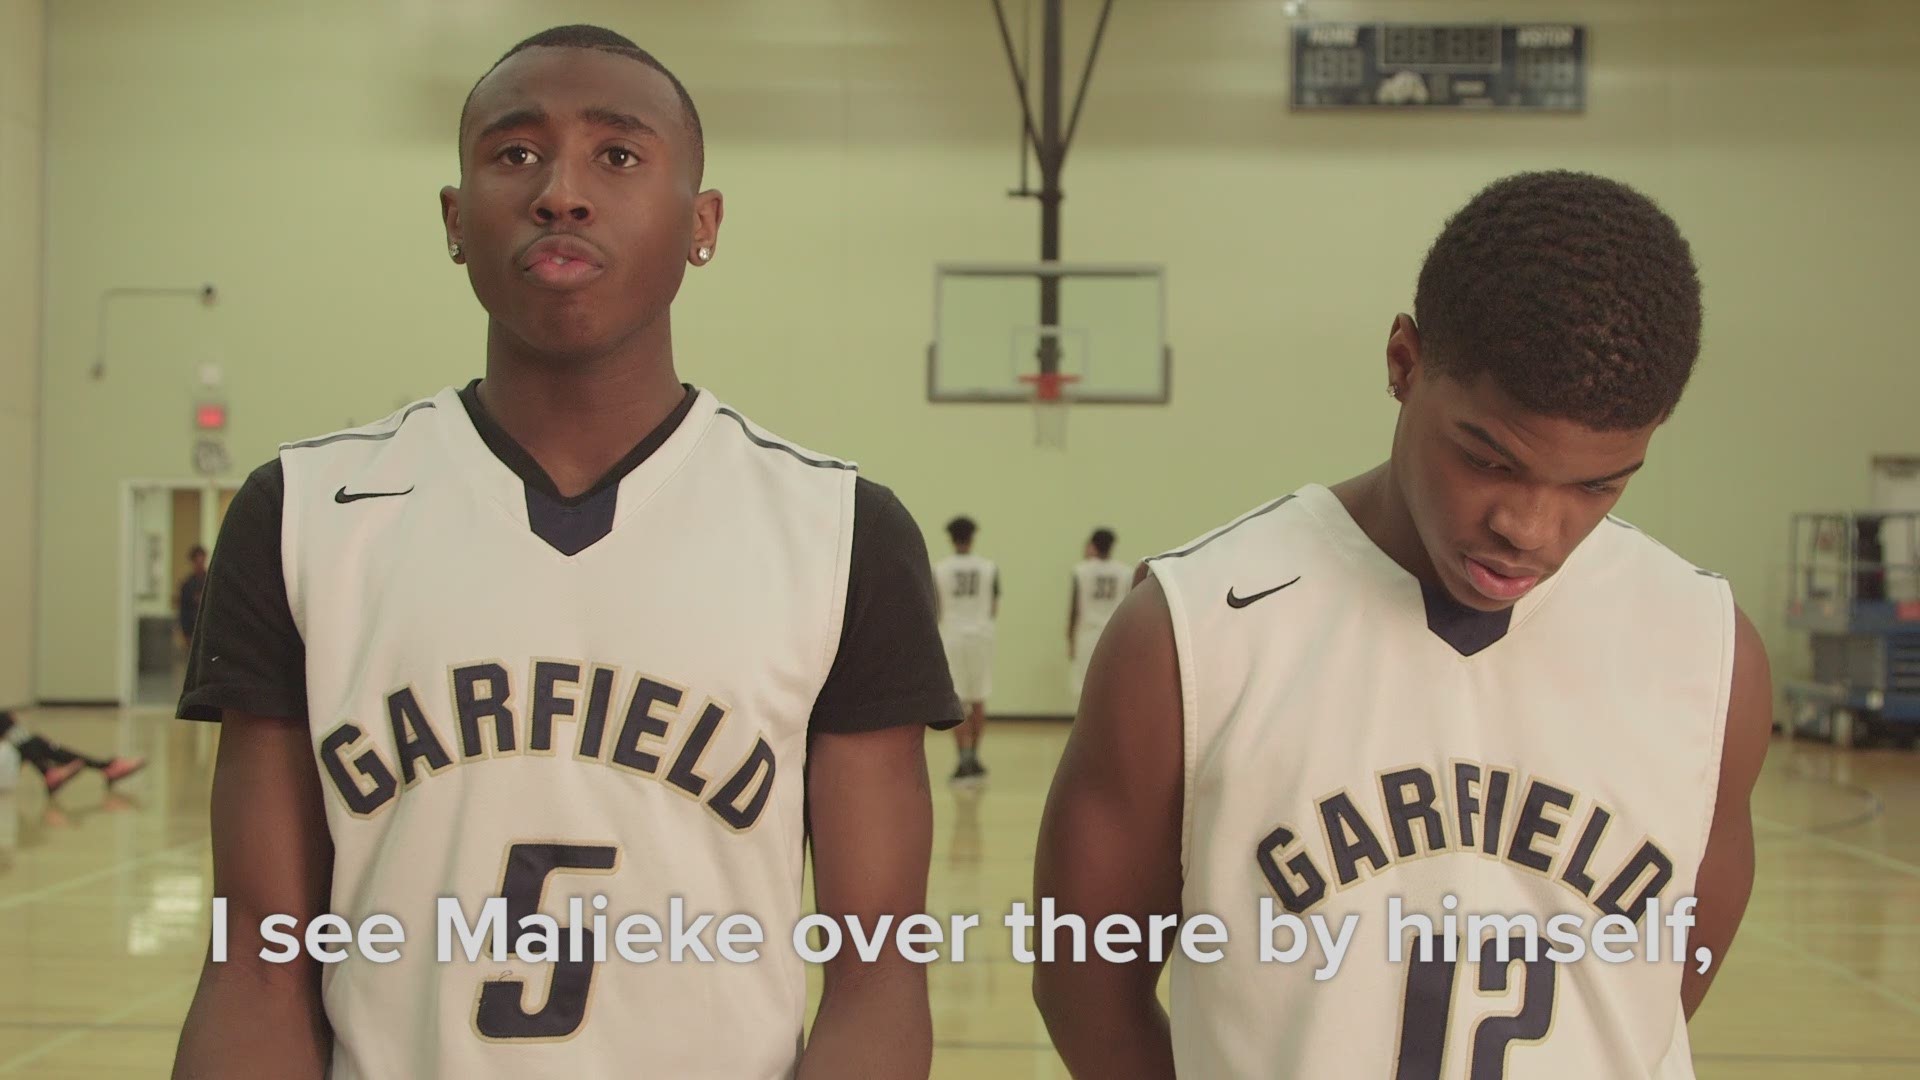 17-year-old Malieke Graham shares how his basketball teammates have impacted his life.  Graham has cerebral palsy but wouldn't allow his disability to stop him from chasing his dream of playing basketball.